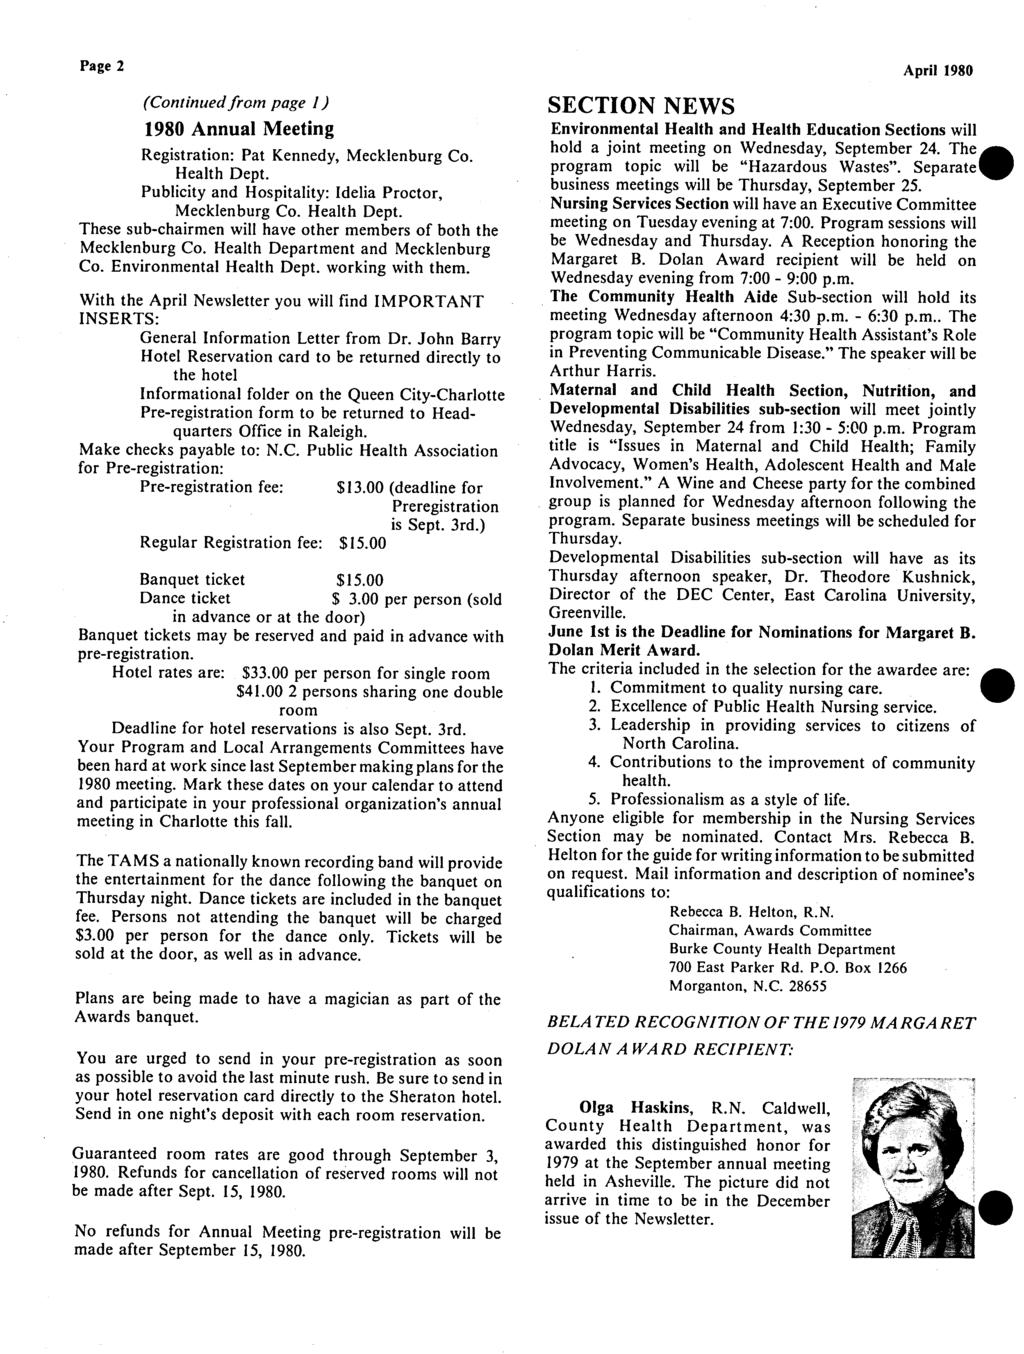 Page 2 Continuedfrom page 1) 1980 Annual Meeting Registration: Pat Kennedy, Mecklenburg Co. Health Dept. Publicity and Hospitality: Idelia Proctor, Mecklenburg Co. Health Dept. These sub -chairmen will have other members of both the Mecklenburg Co.